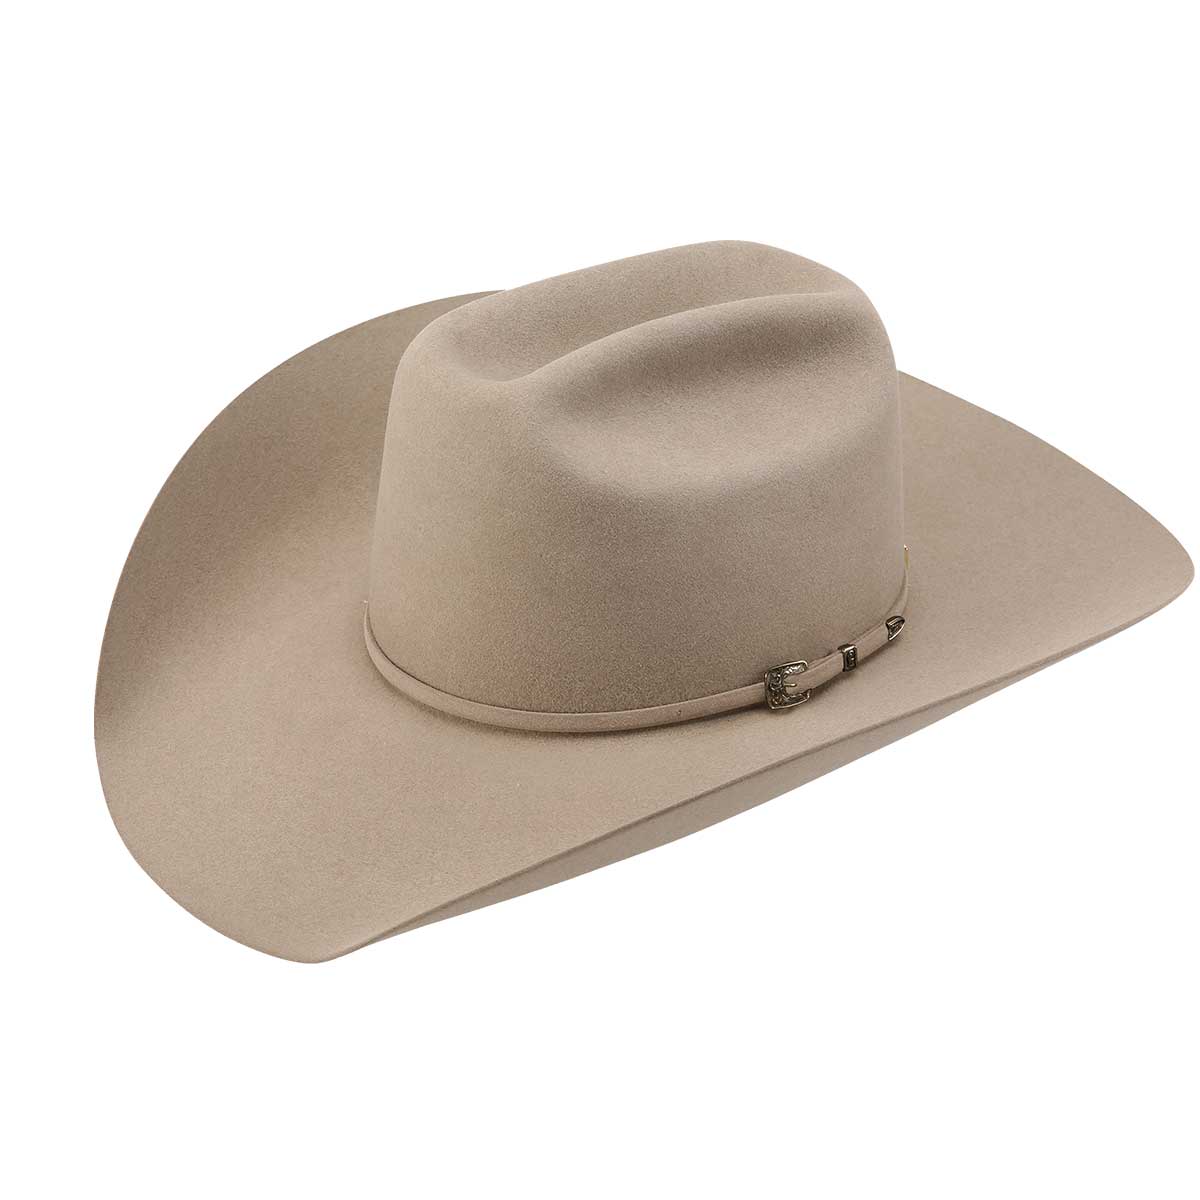 American Hat Makers Cattleman Felt Cowboy Hat with Cowboy Hat Band LG / Brown